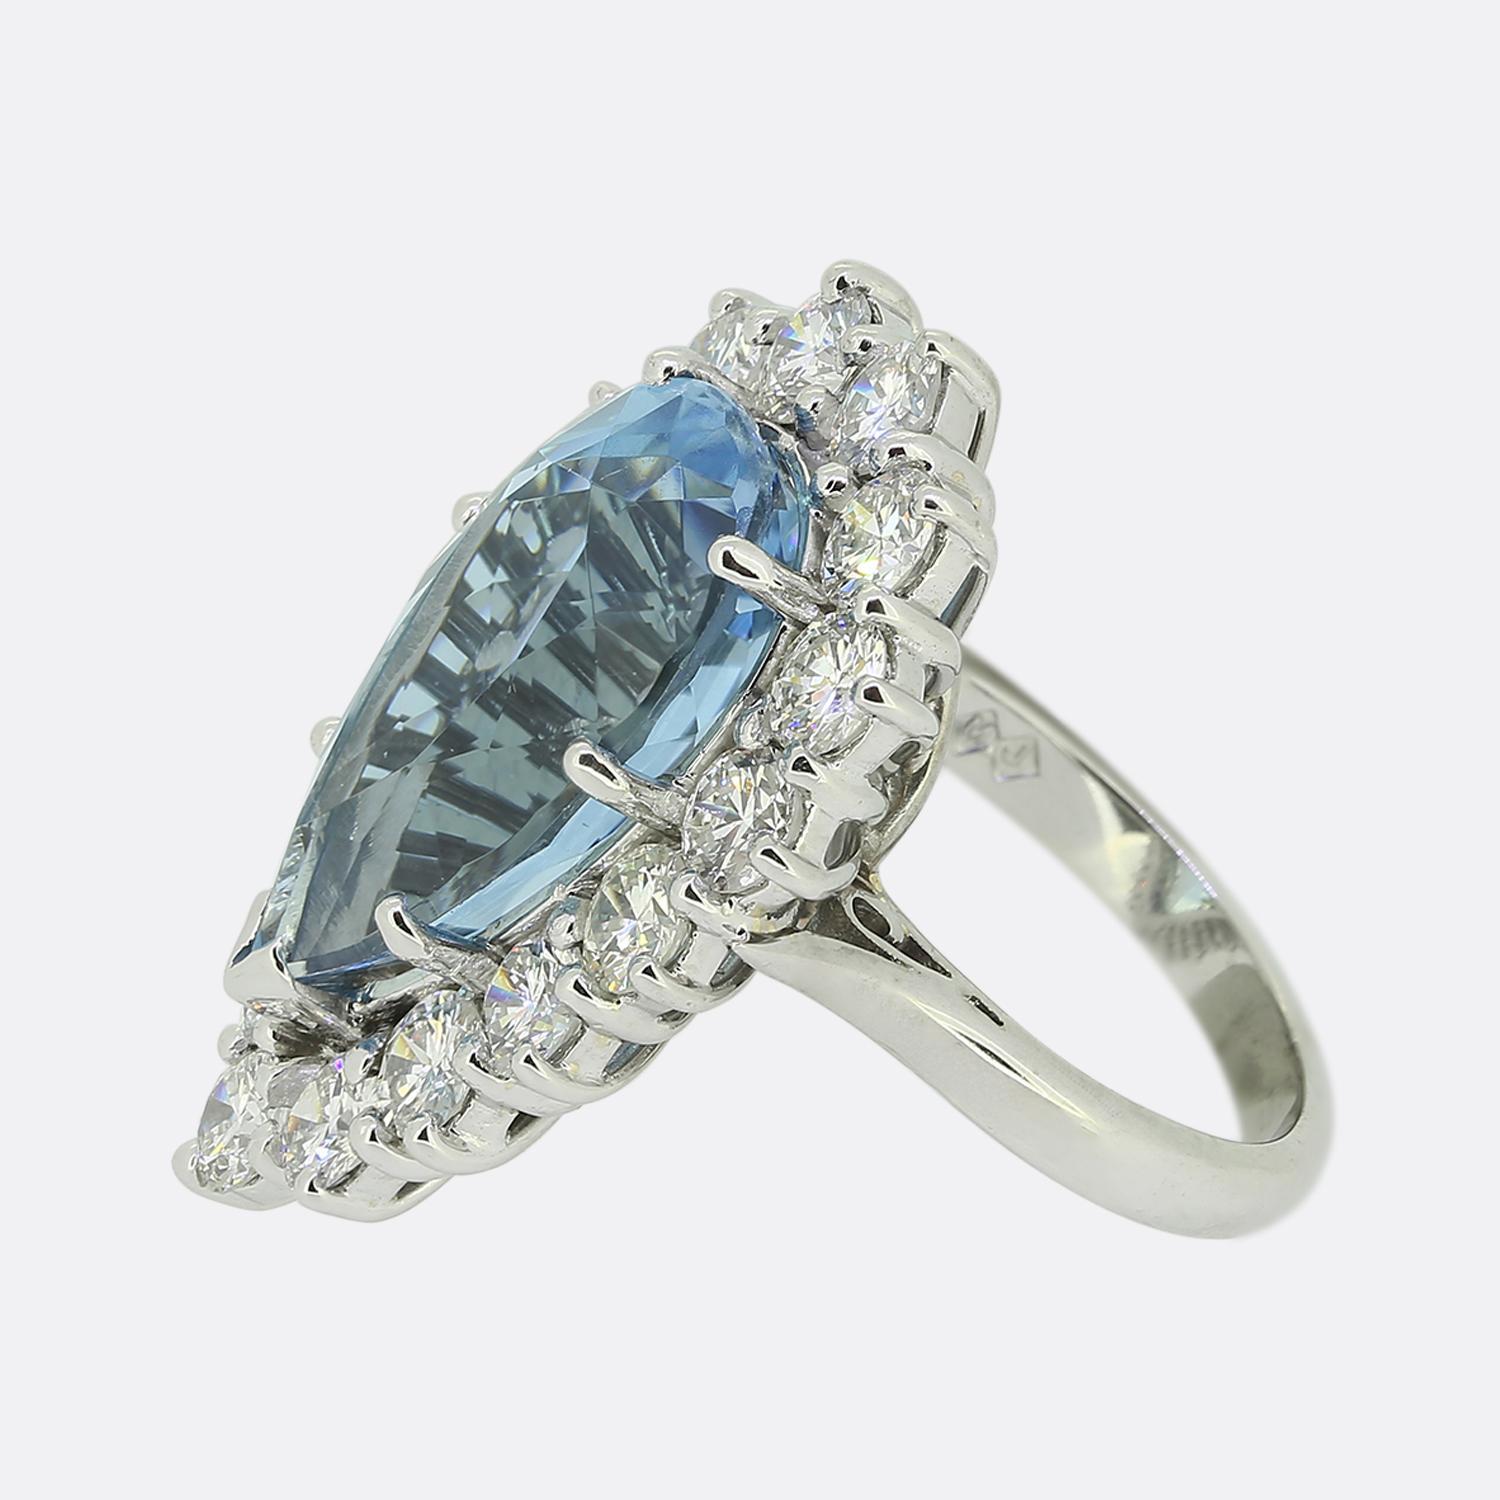 This is a wonderful vintage aquamarine and diamond cluster ring. The ring features a centralised pear shaped aquamarine possessing a beautifully even mid blue tone which is highly complimented by a bright white round brilliant cut diamond set